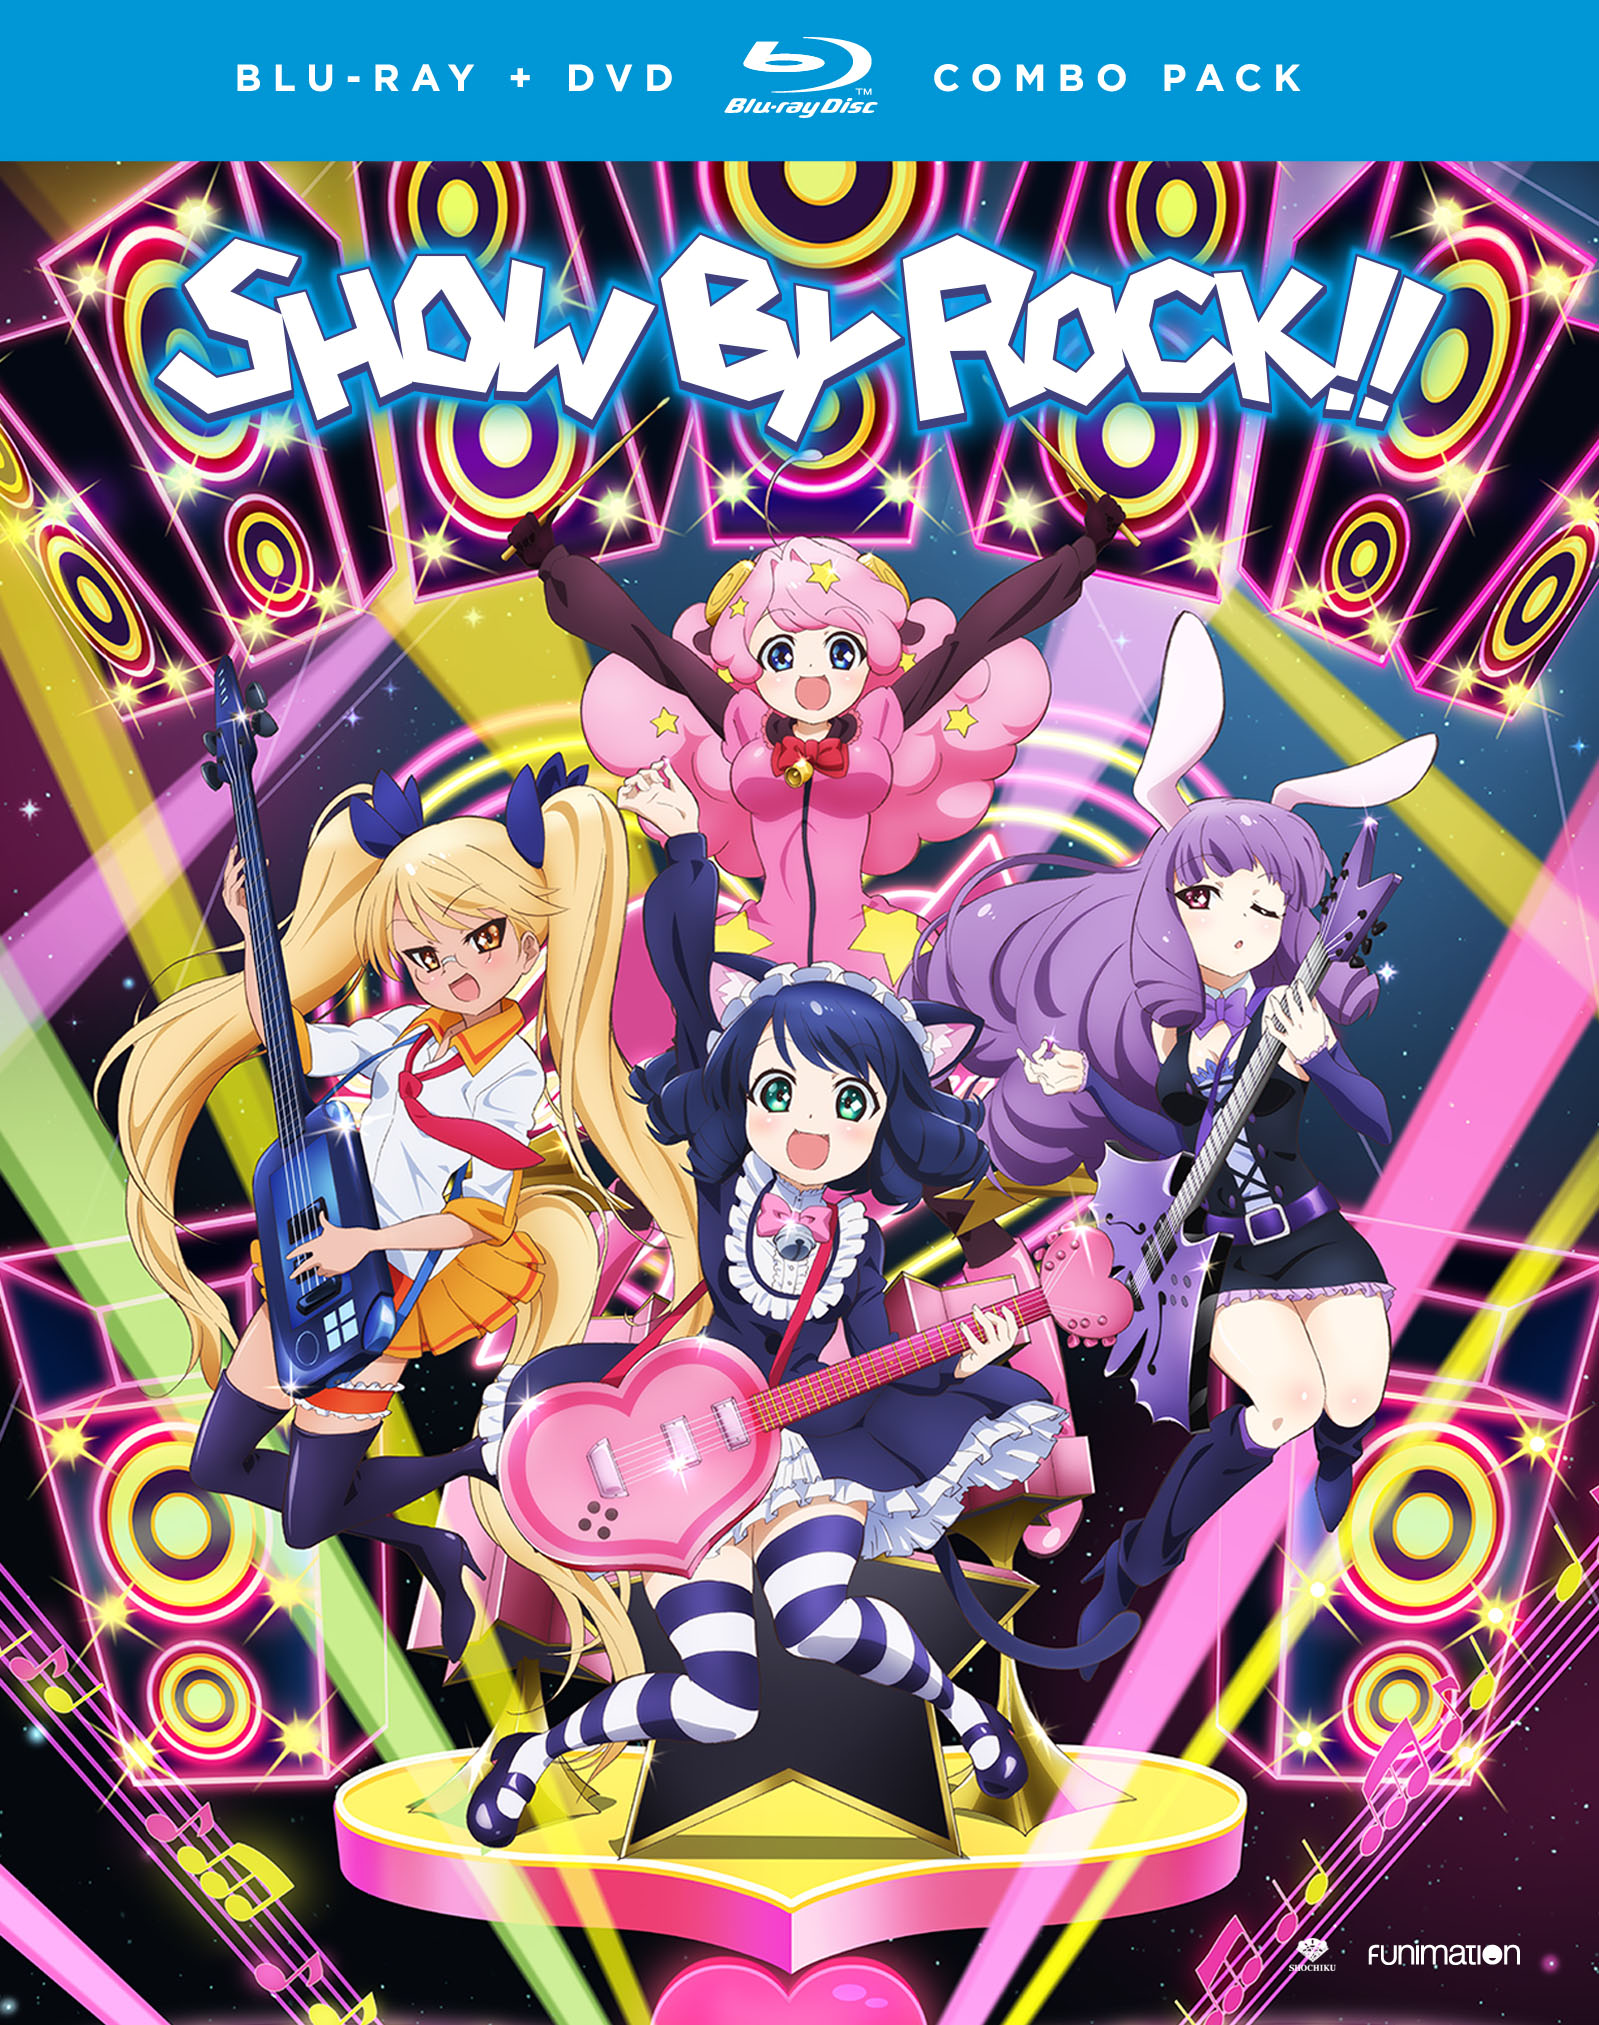 show by rock しょ と dvd